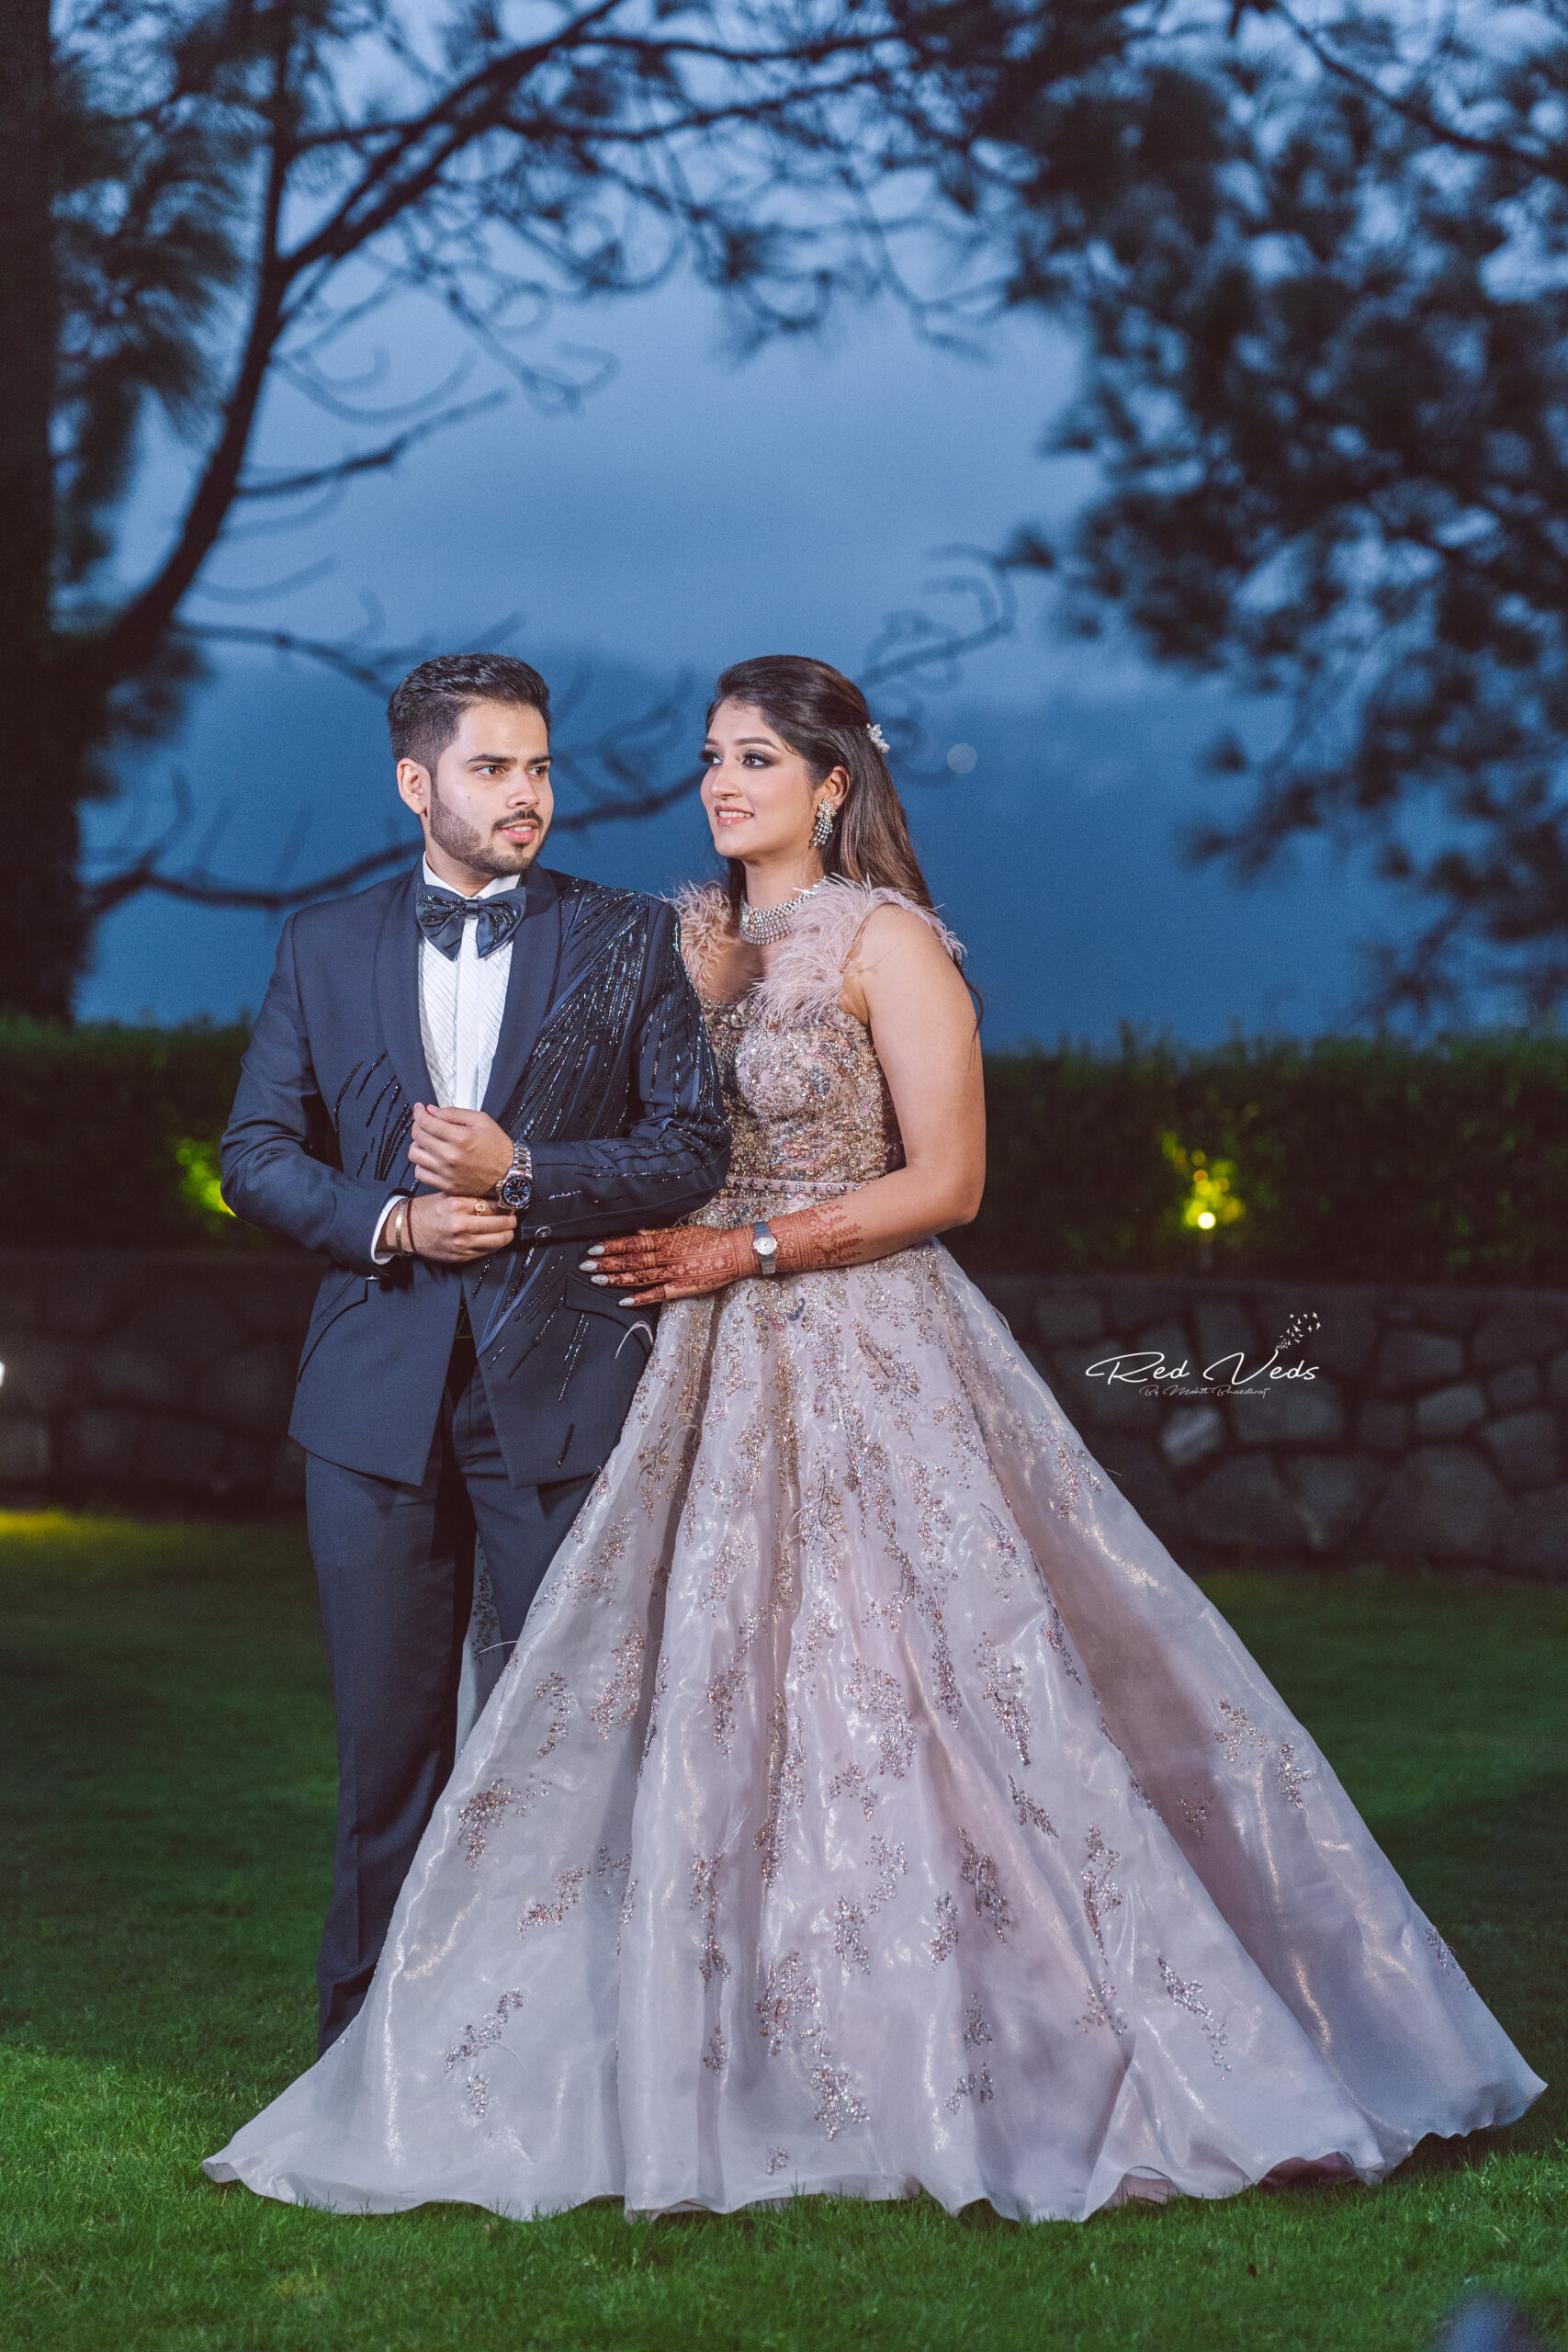 What to Wear for Pre Wedding Photos: 20 Outfit Ideas